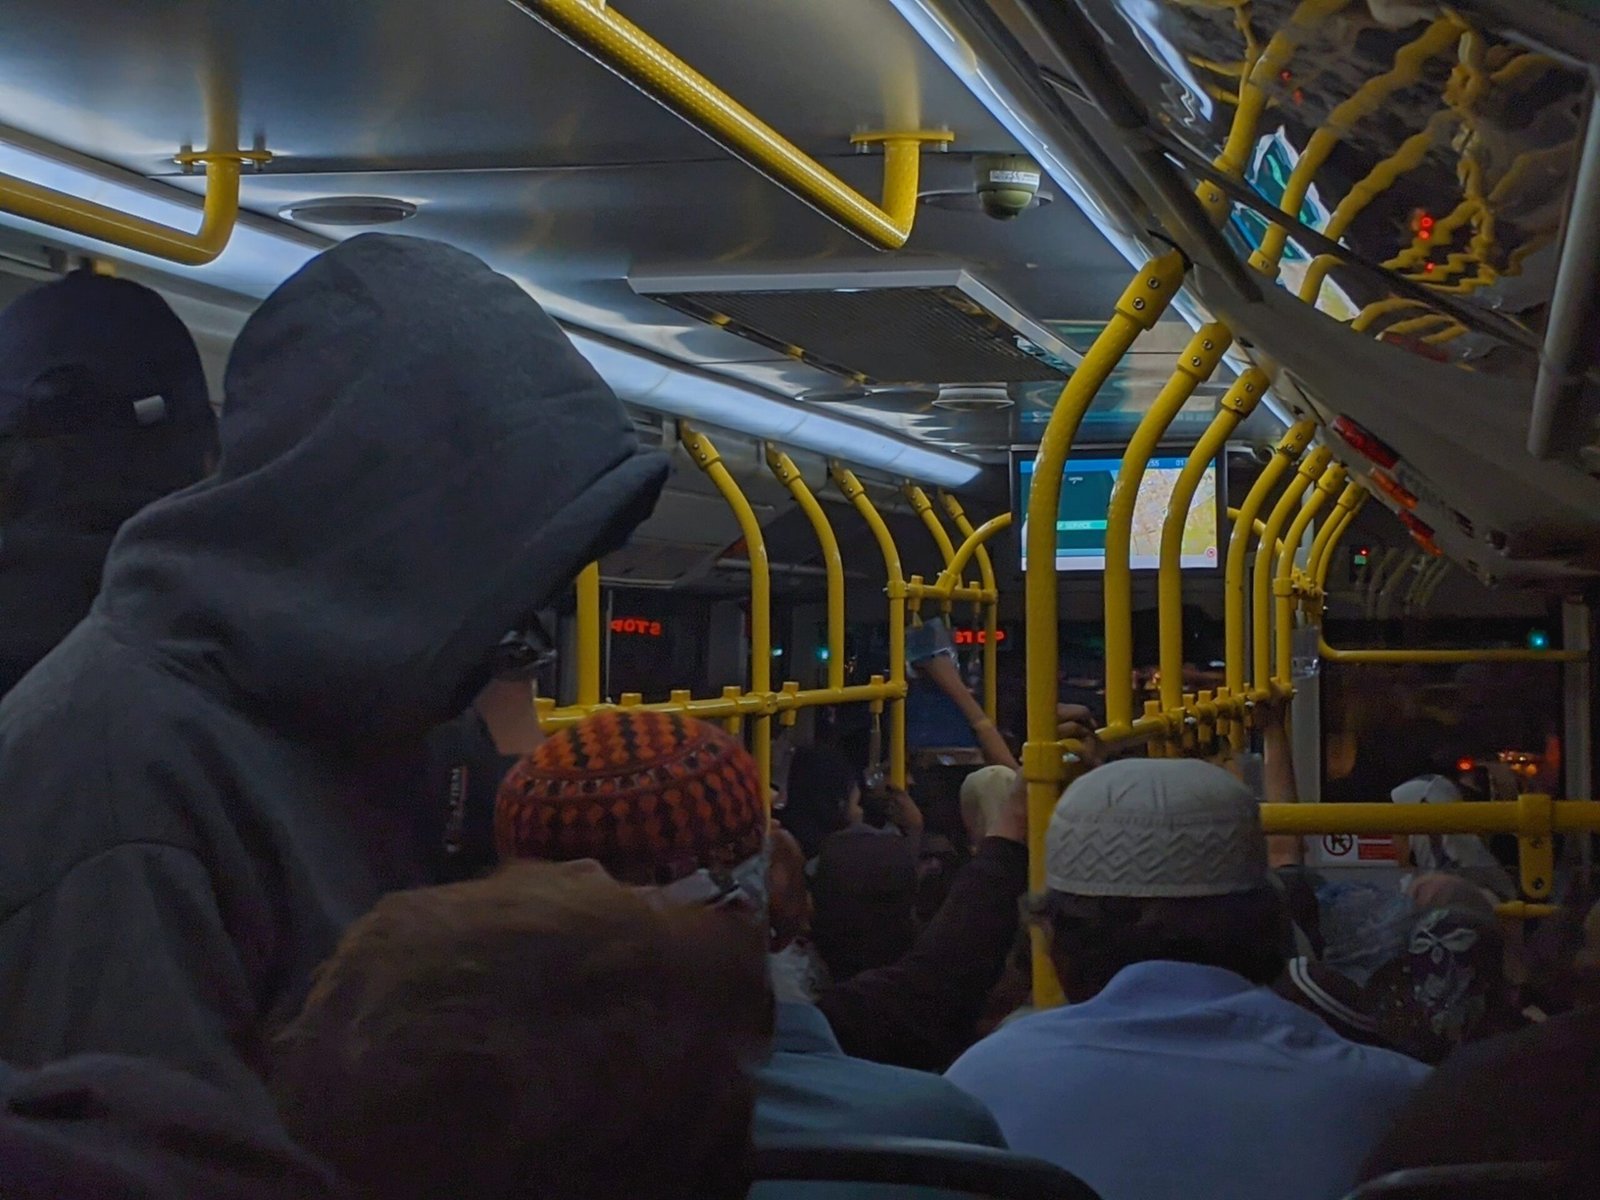 a group of people riding on a bus